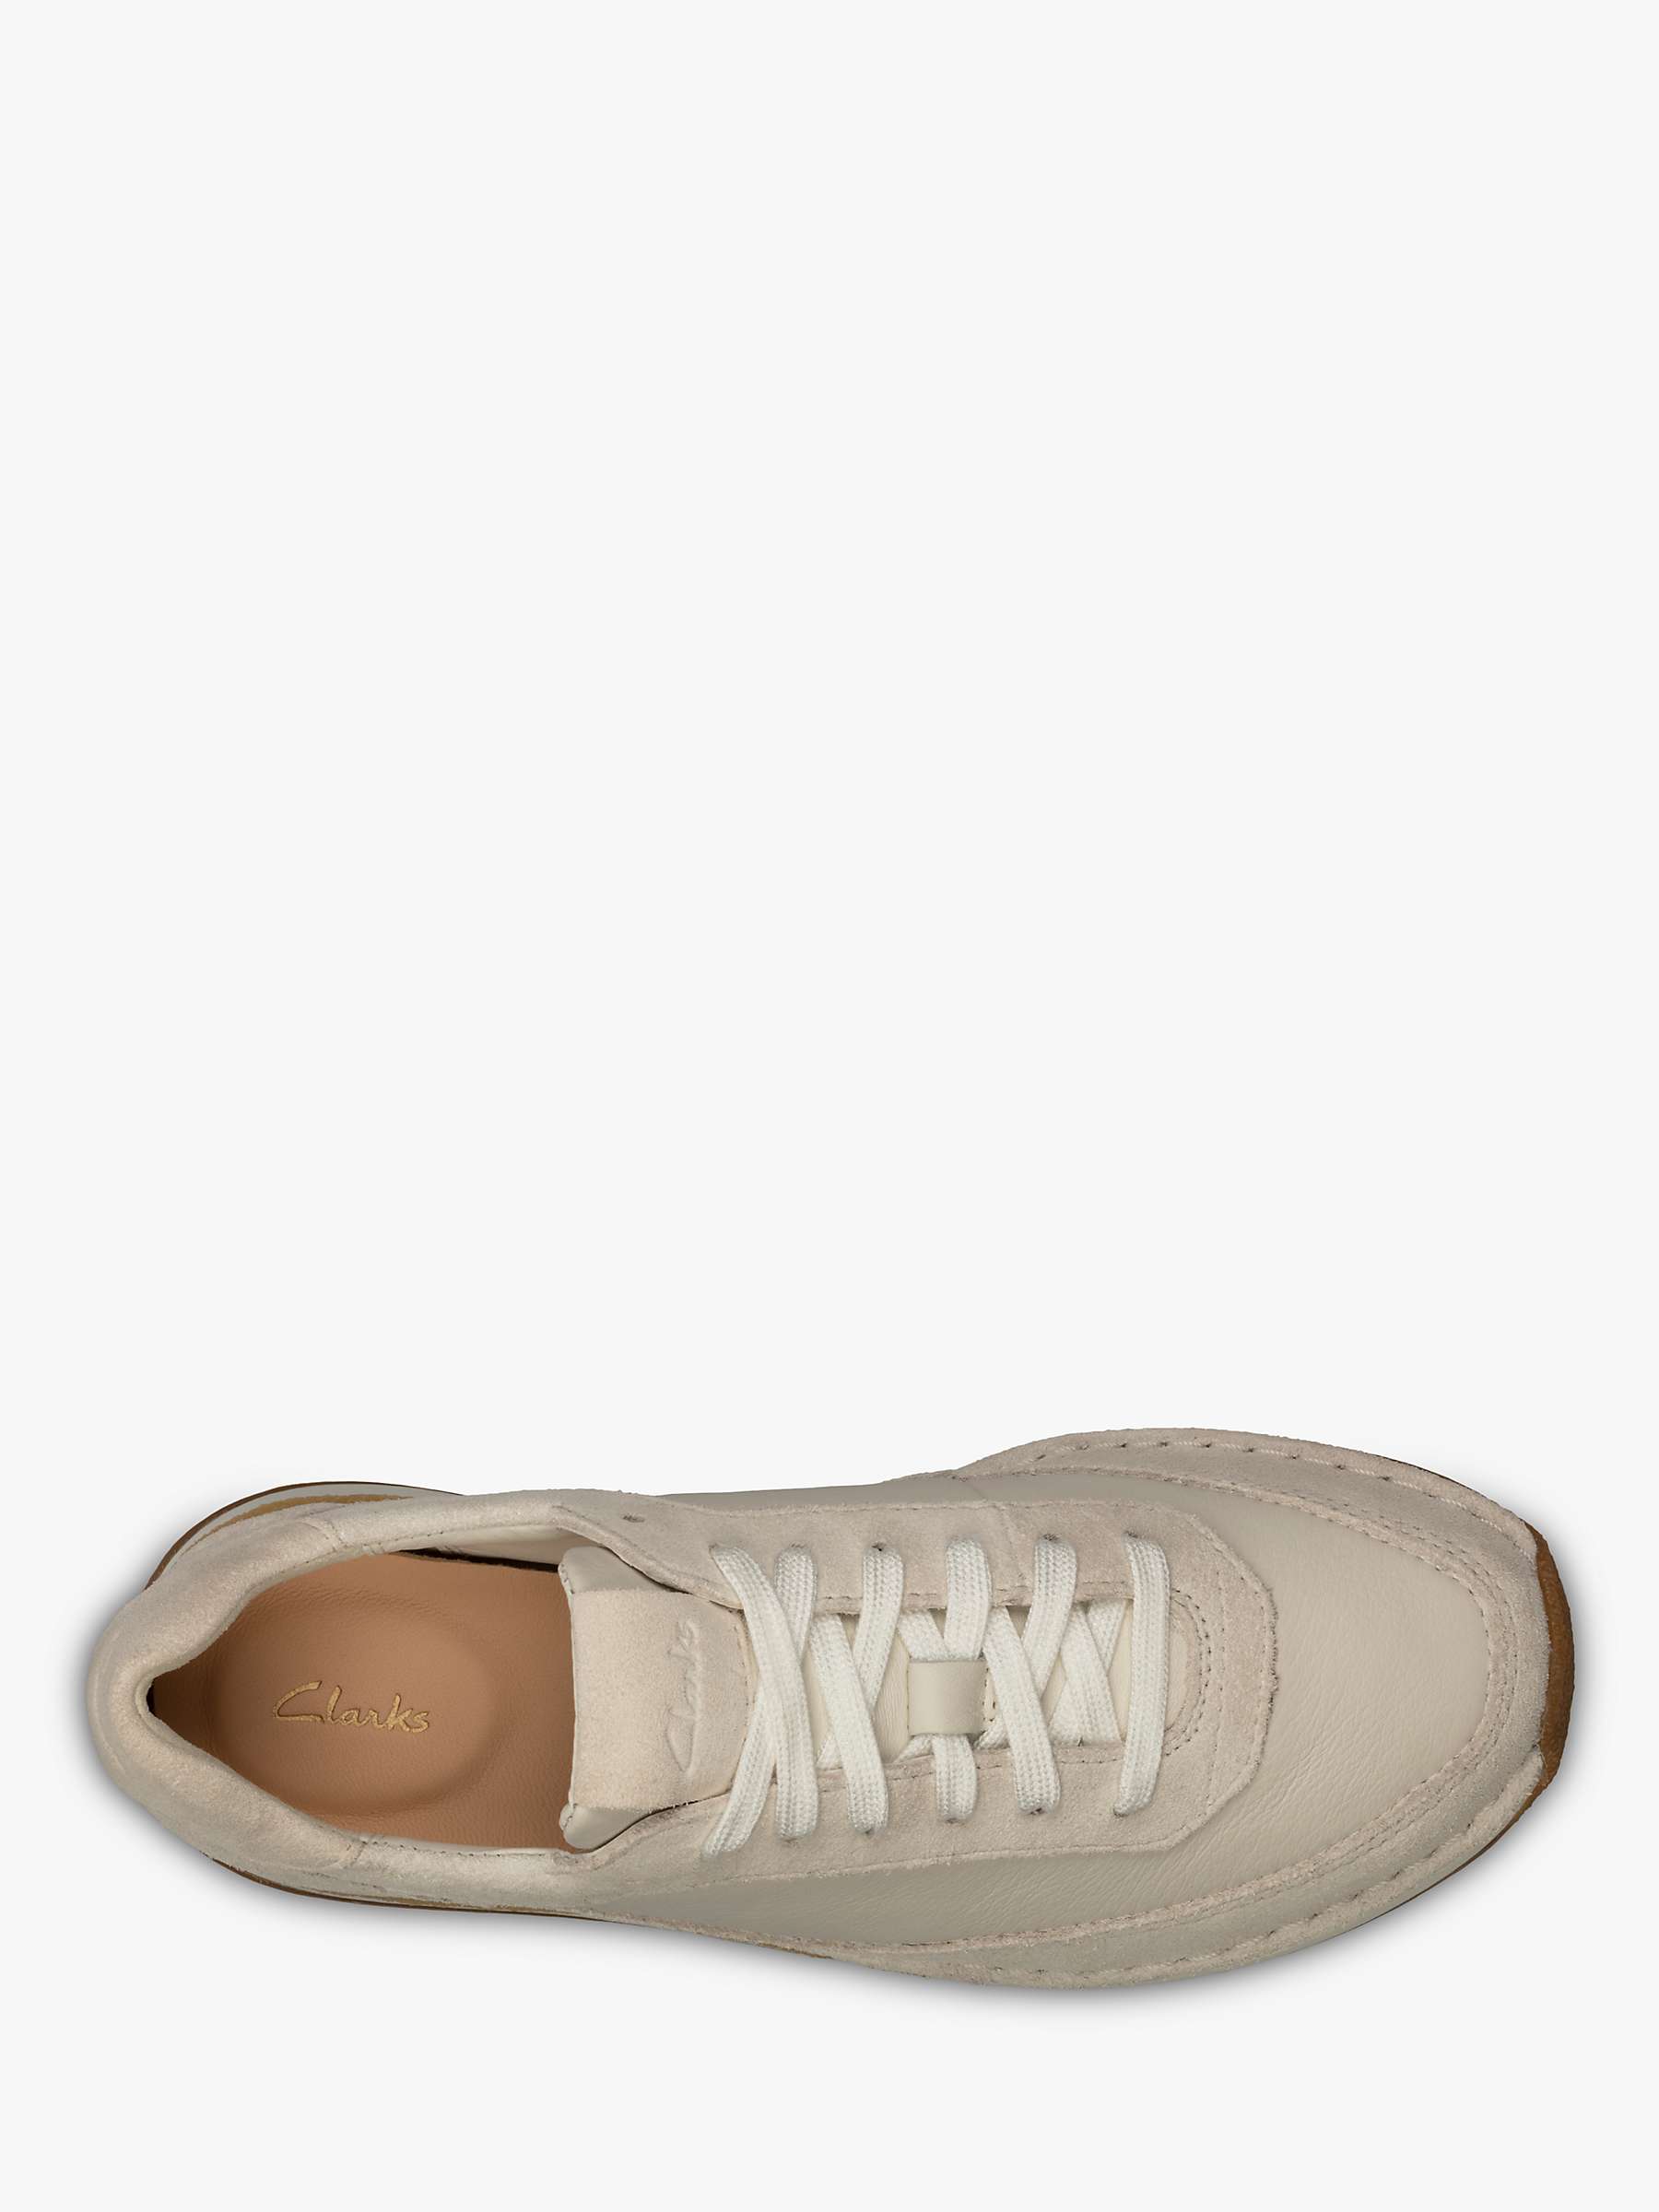 Buy Clarks CraftRun Suede Trainers Online at johnlewis.com